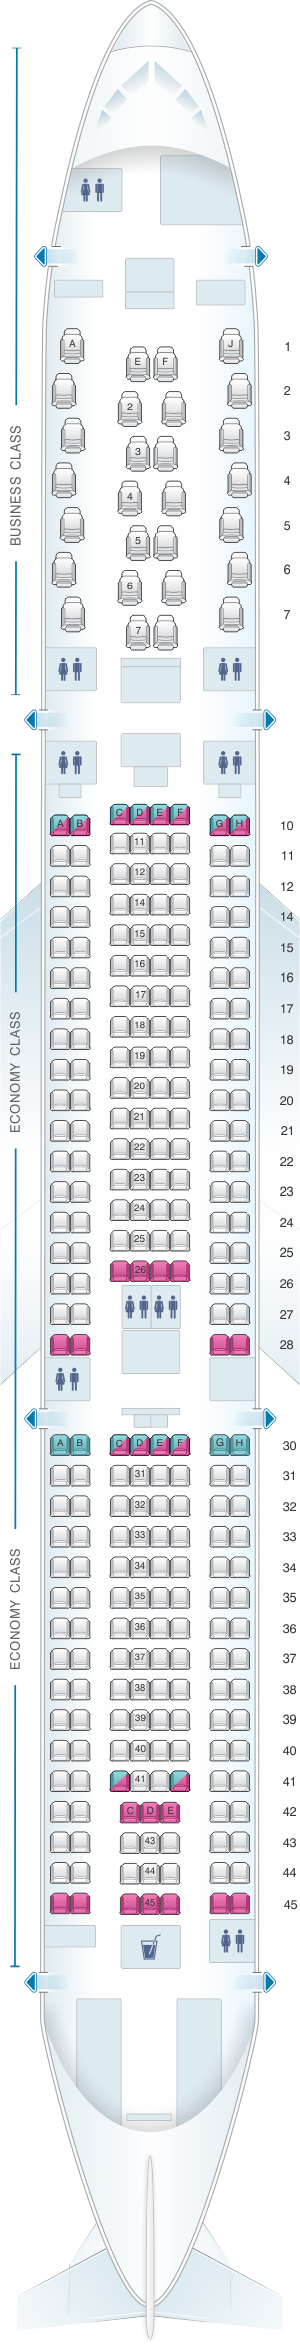 Seat map for Air Mauritius Airbus A330 900Neo